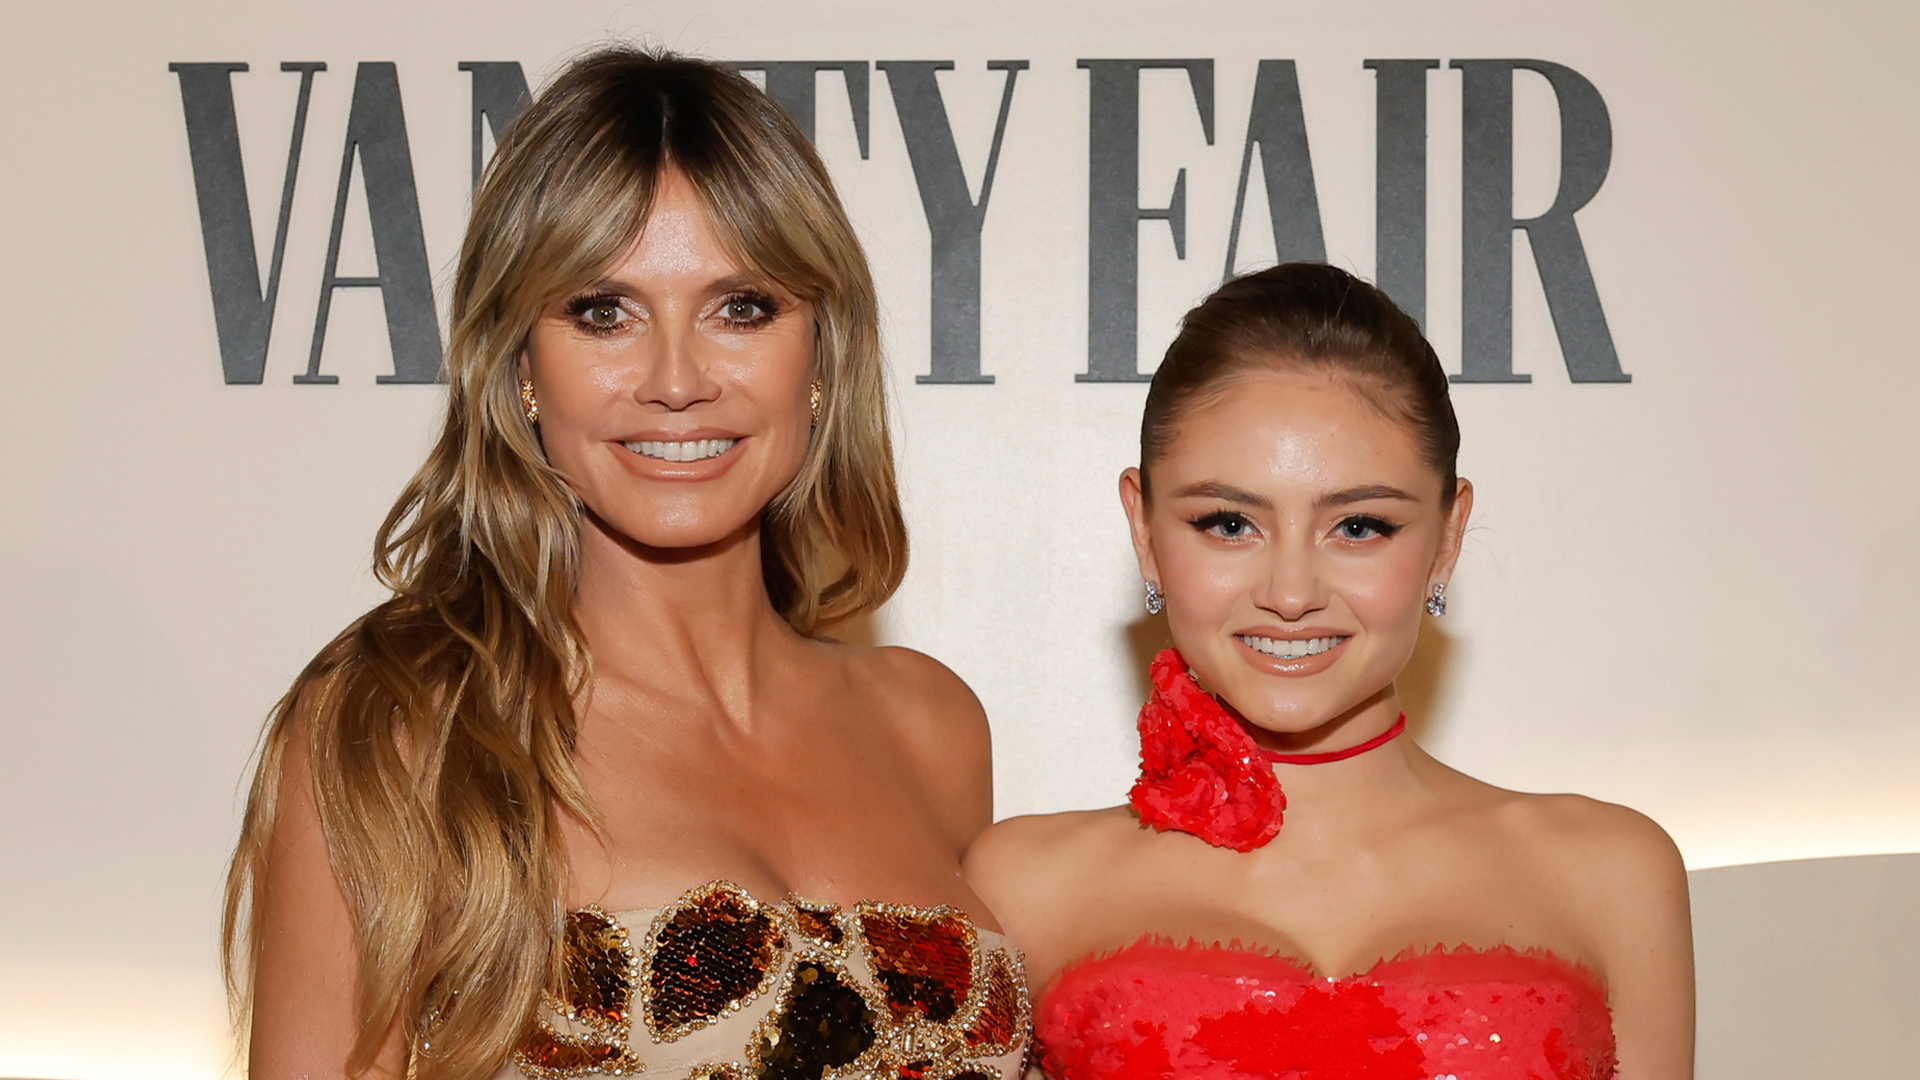 Heidi Klum’s daughter Leni, 19, looks just like her mom as both models sing Spice Girls hit on way to star-studded event